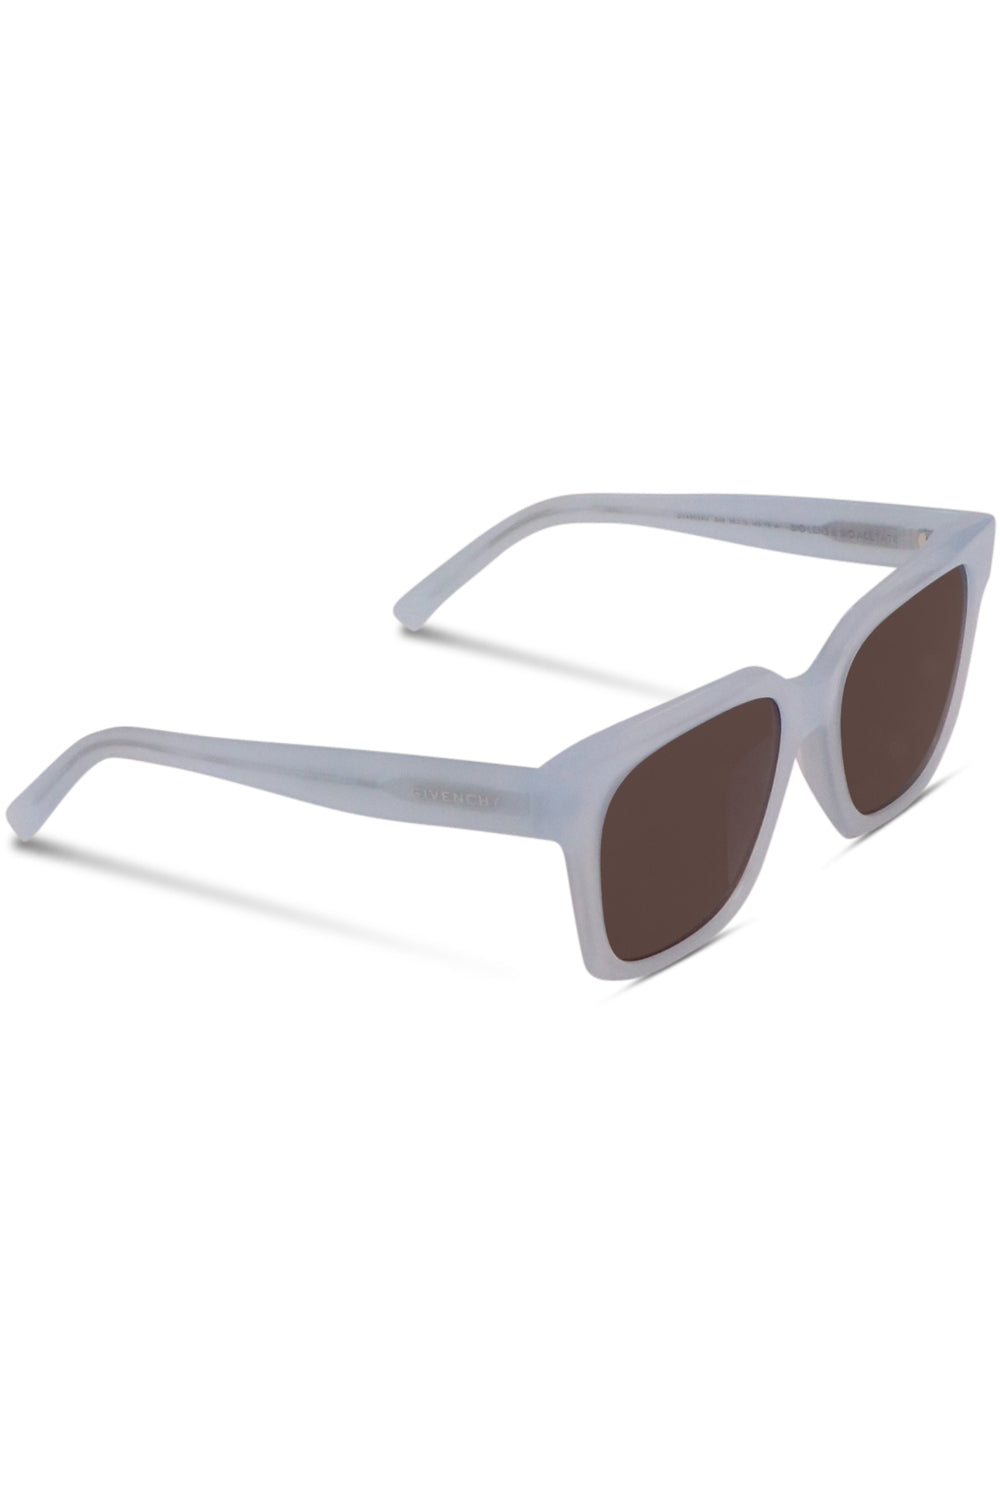 GIVENCHY Accessories MULTI RECTANGLE SUNGLASSES | CLEAR BLUE/GREY